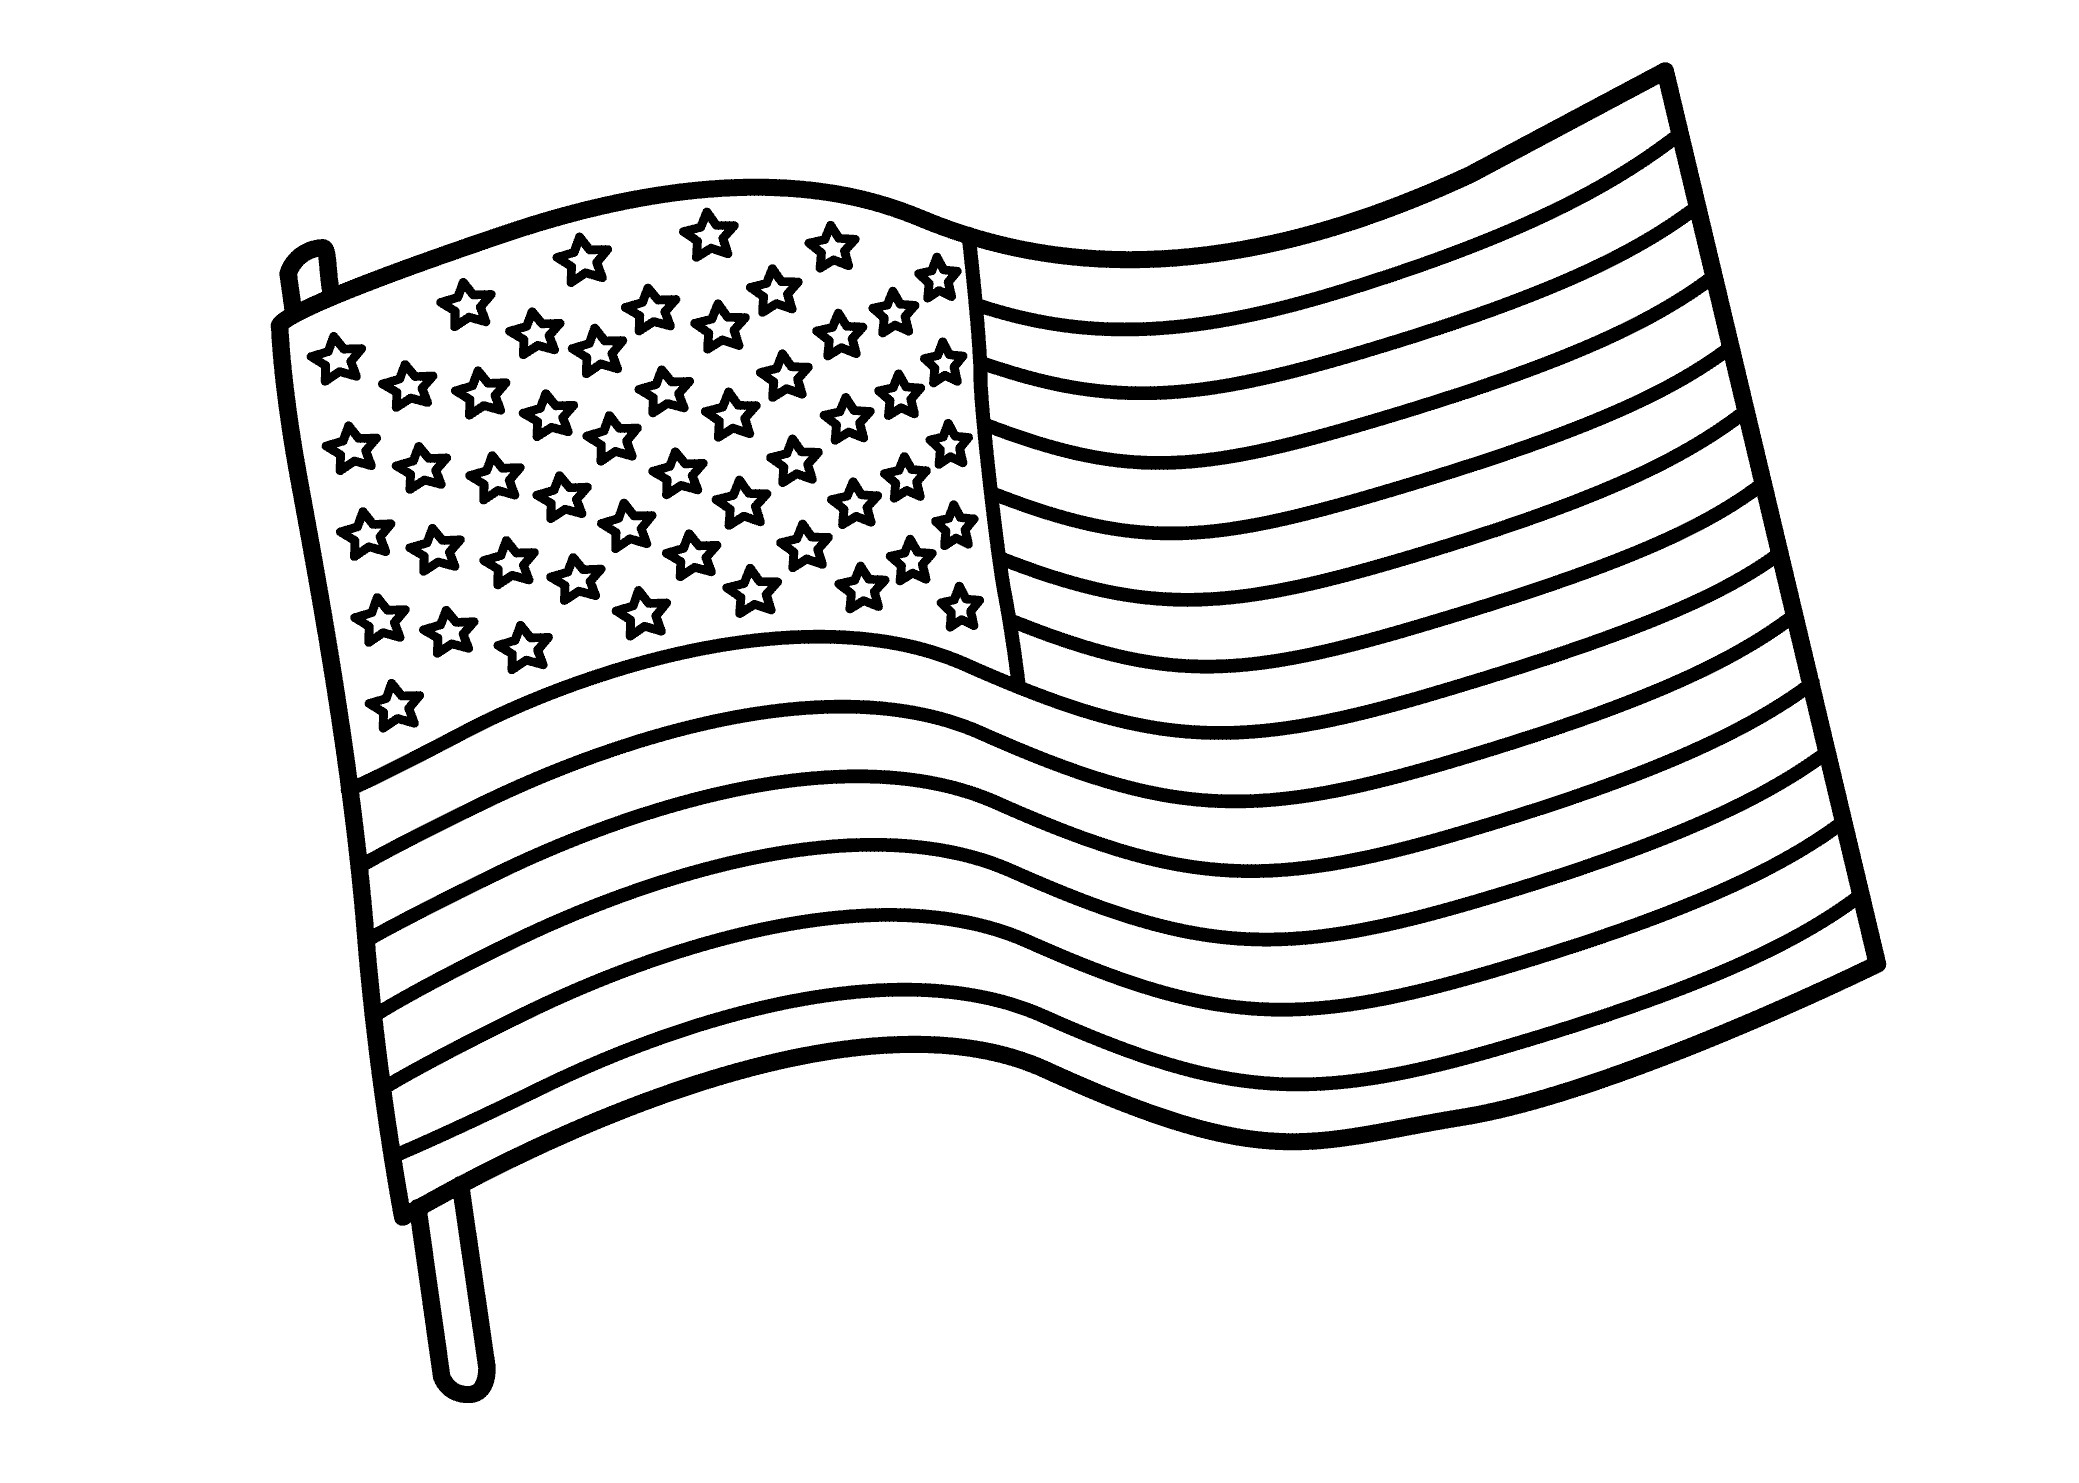 The American Flag Coloring Page Coloring Pages And Books Free American Flag Coloring Pages Best